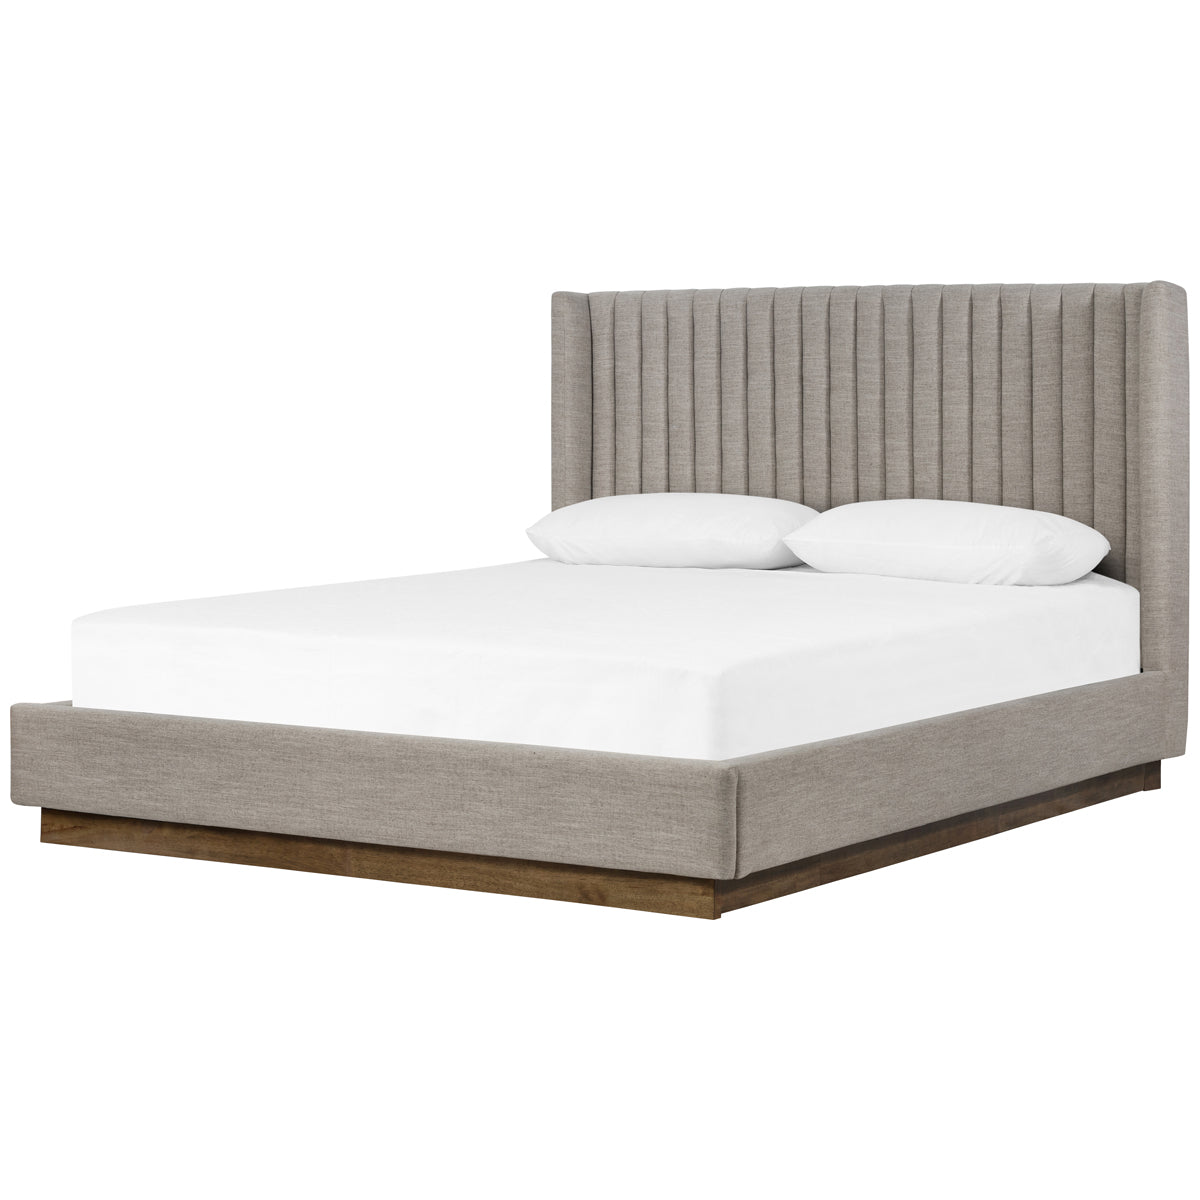 Four Hands Easton Montgomery Bed - Savile Flannel